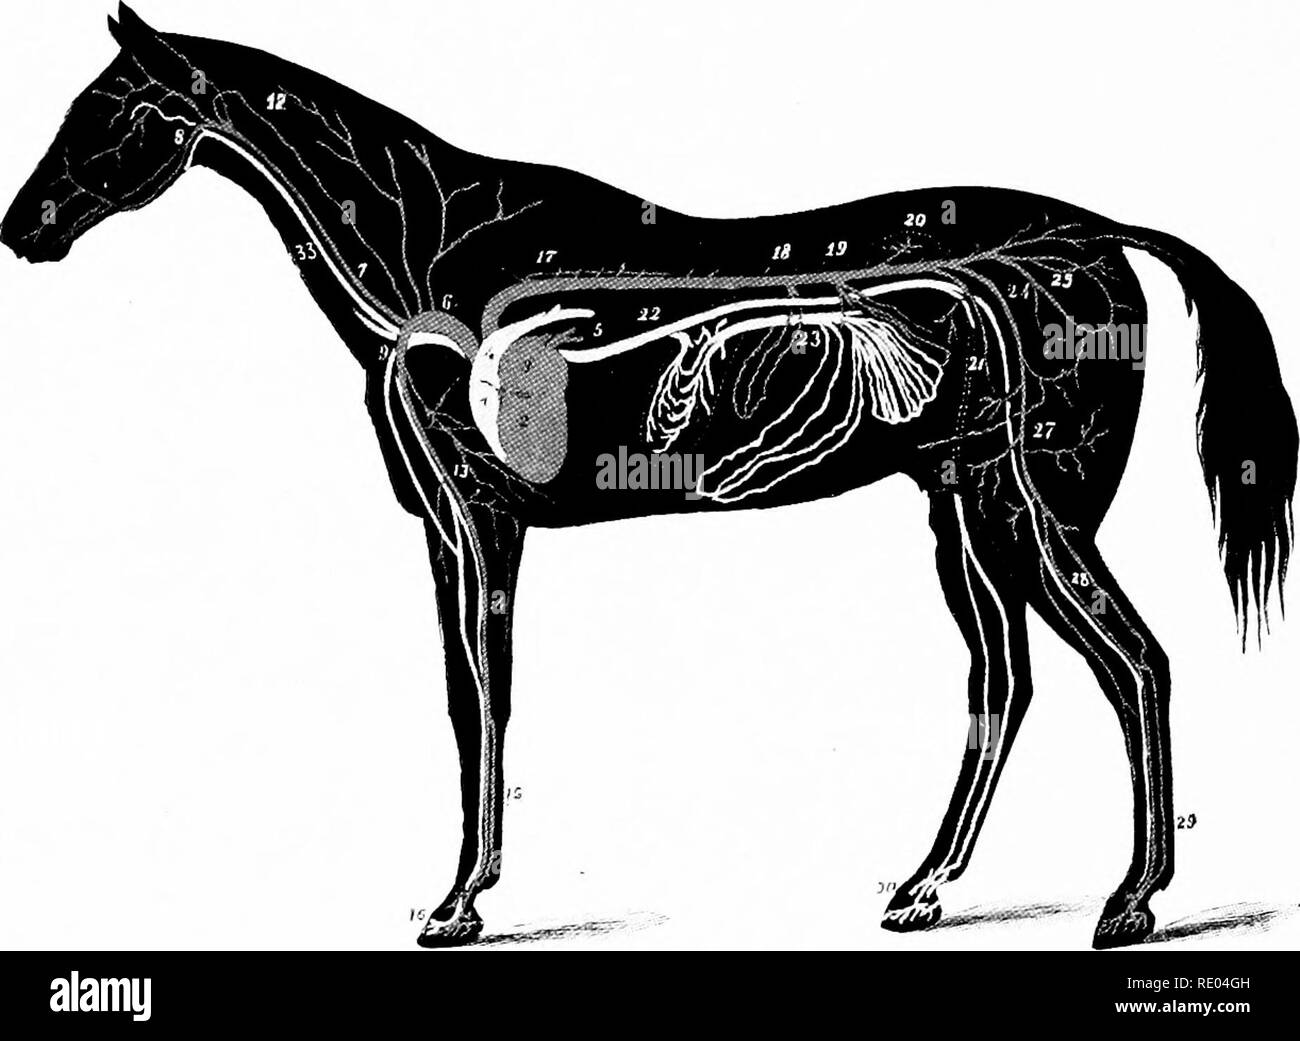 . Veterinary studies for agricultural students. Veterinary medicine. 3.x ANATOMY. axillary near the division of the anterior aorta into right and left axillary arteries. A corpuscle, on its way from the heart to the brain would pass through the aorta, anterior aorta, right axillary, cephalic, and common carotid and then through a branch of the carotid to the brain.. FIG. 19. CIRCULATION. ARTERIES GRAY, VEINS WHITE. 1, Heart, right ventricle; 2, left ventricle; 3, loft auricle; 4, pulmonary artery; 5, pulmonary veins; 6, anterior aorta; 7, carotid artery; 9, left axillary artery; 13, humeral ar Stock Photo